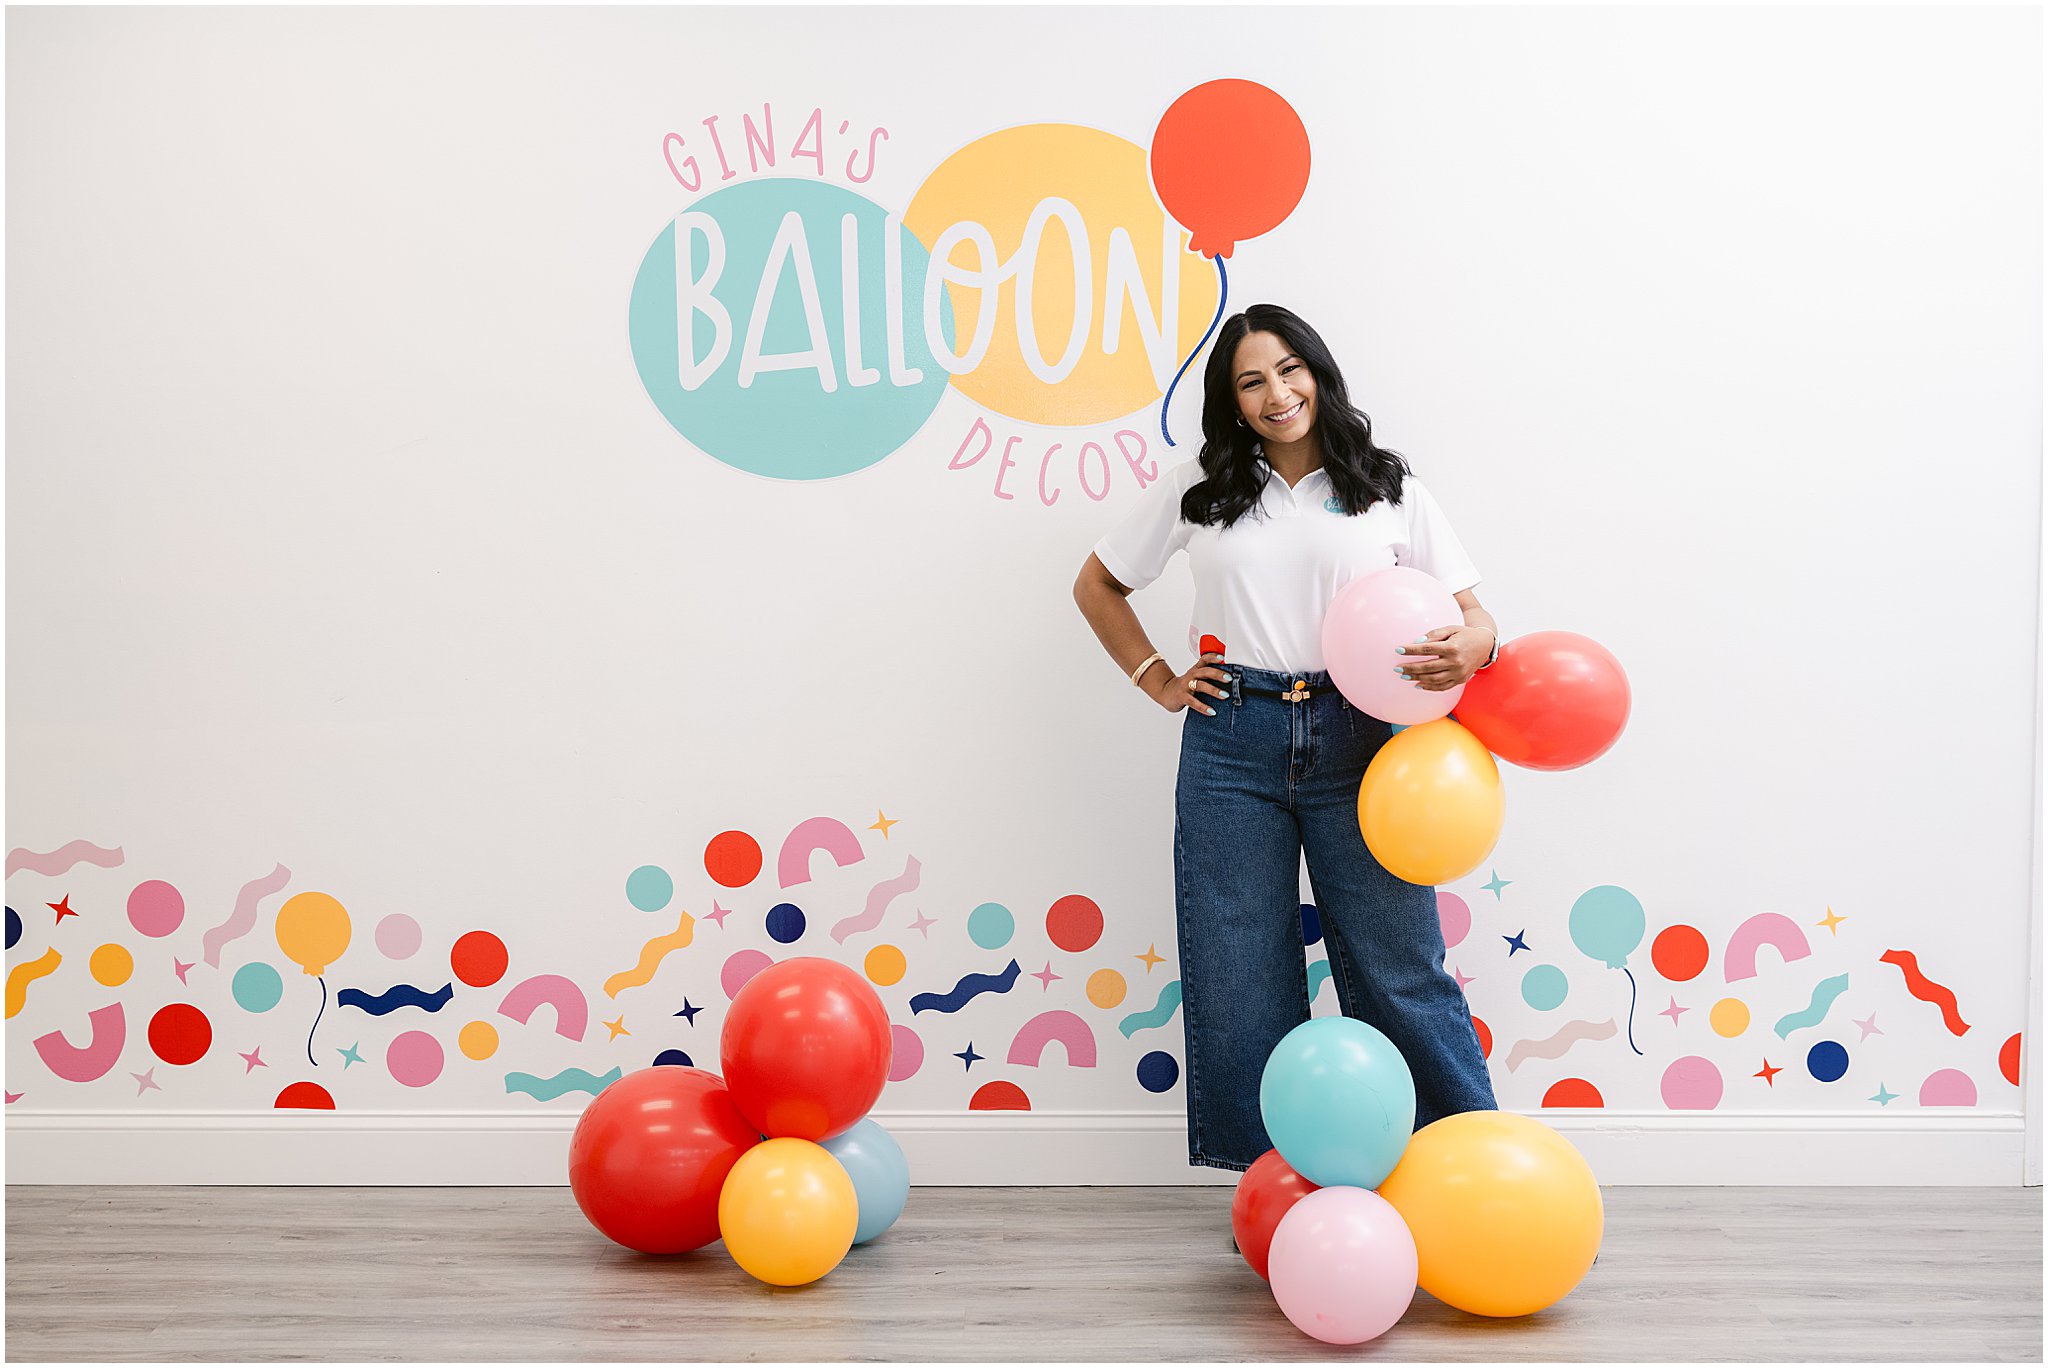 Gina with her colorful balloons and new branding